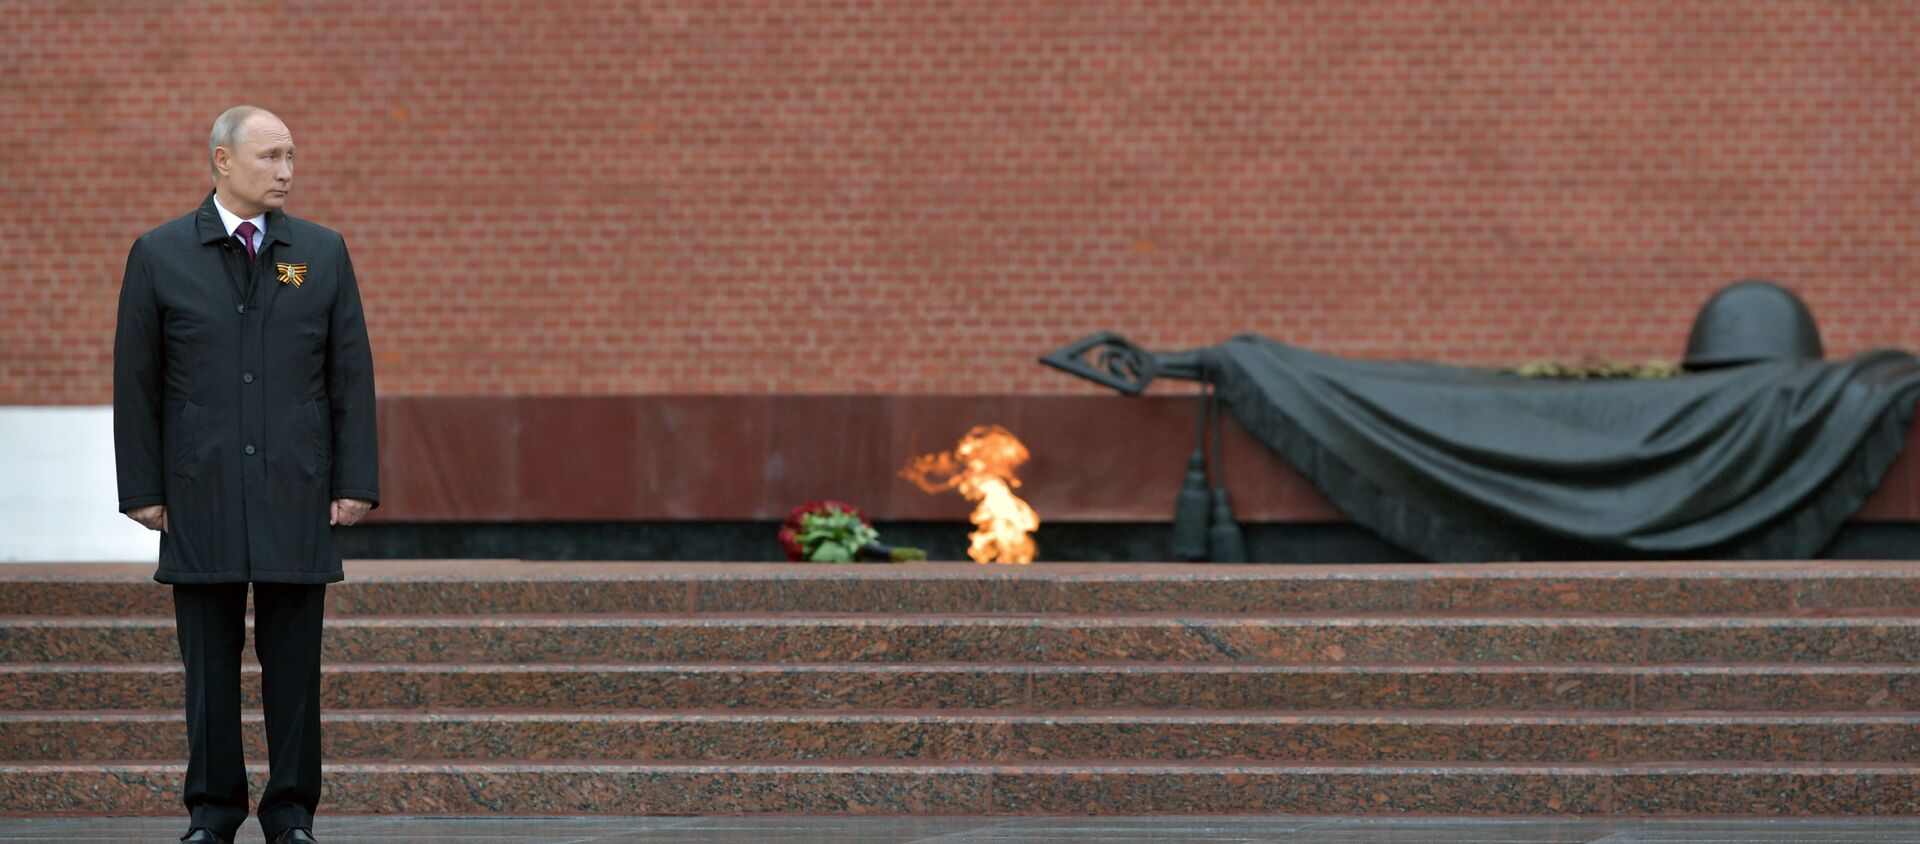 Russian President Vladimir Putin on the ceremony of laying flowers on the Unknown Soldier's Grave, Alexander Garden, 9 May 2020 - Sputnik International, 1920, 18.06.2020